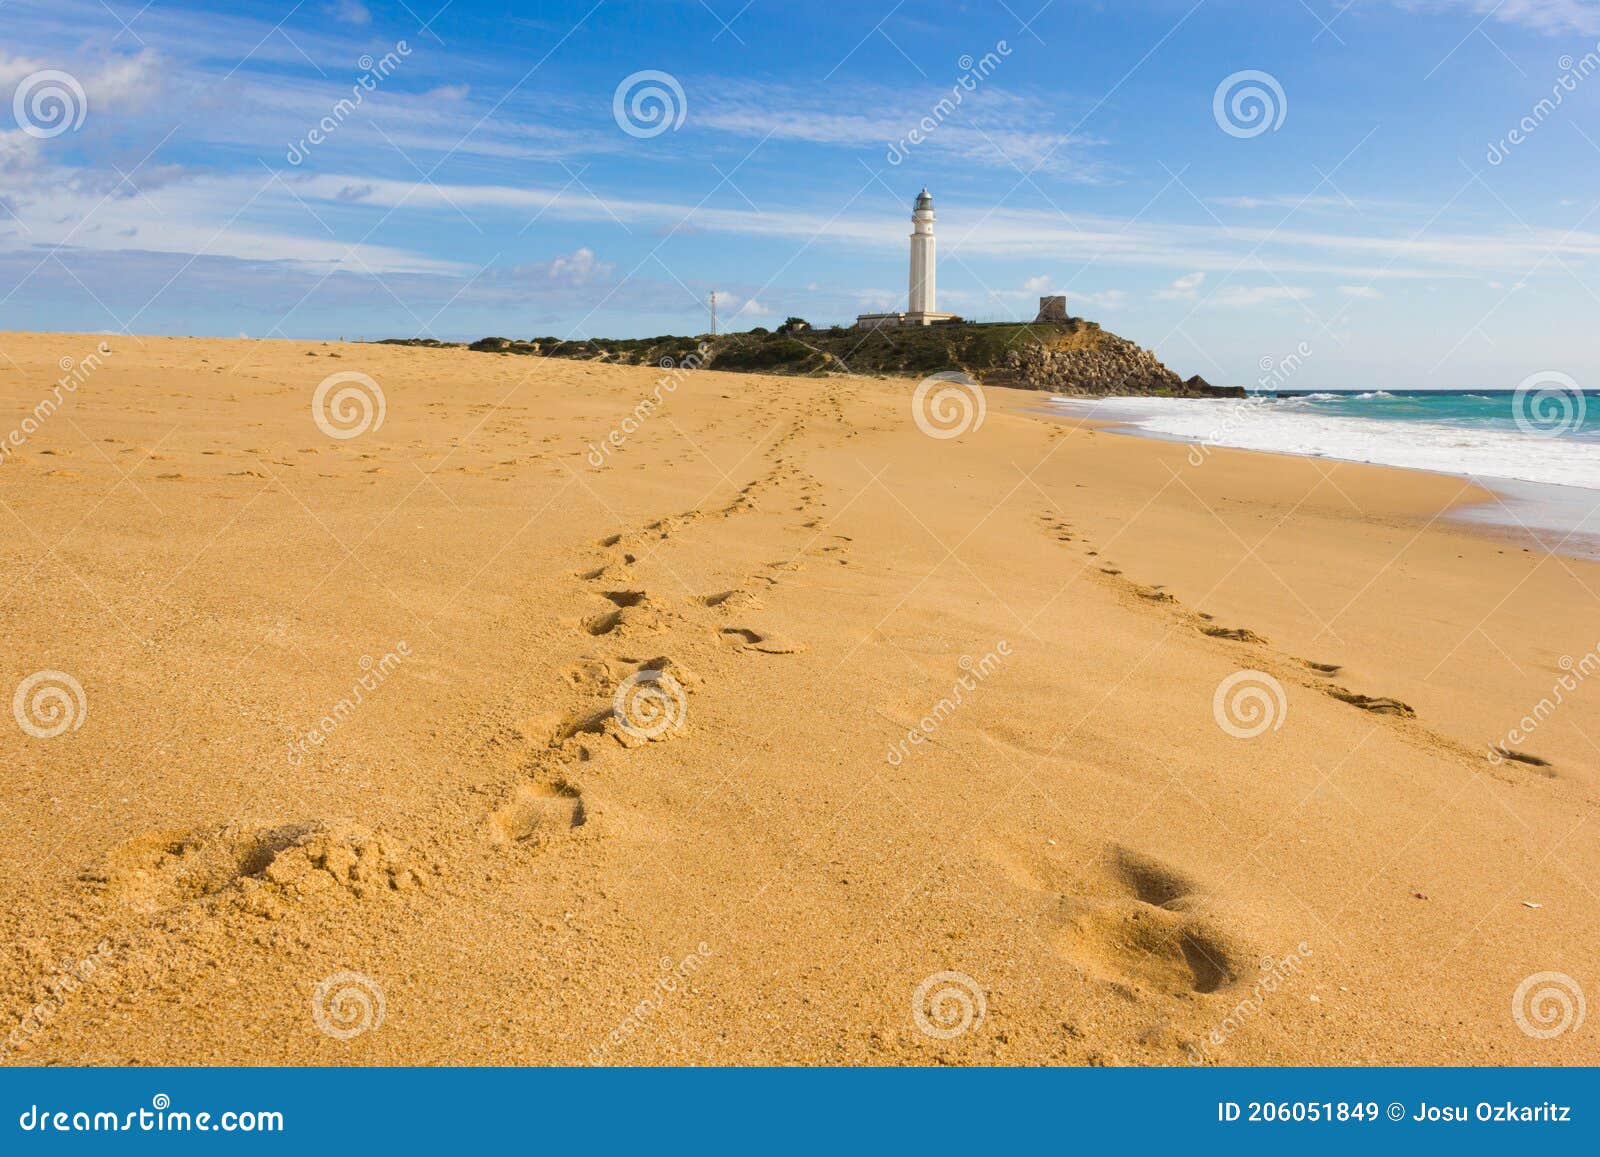 footsteps on the sand at zahora beach leading to trafalgar lighthouse